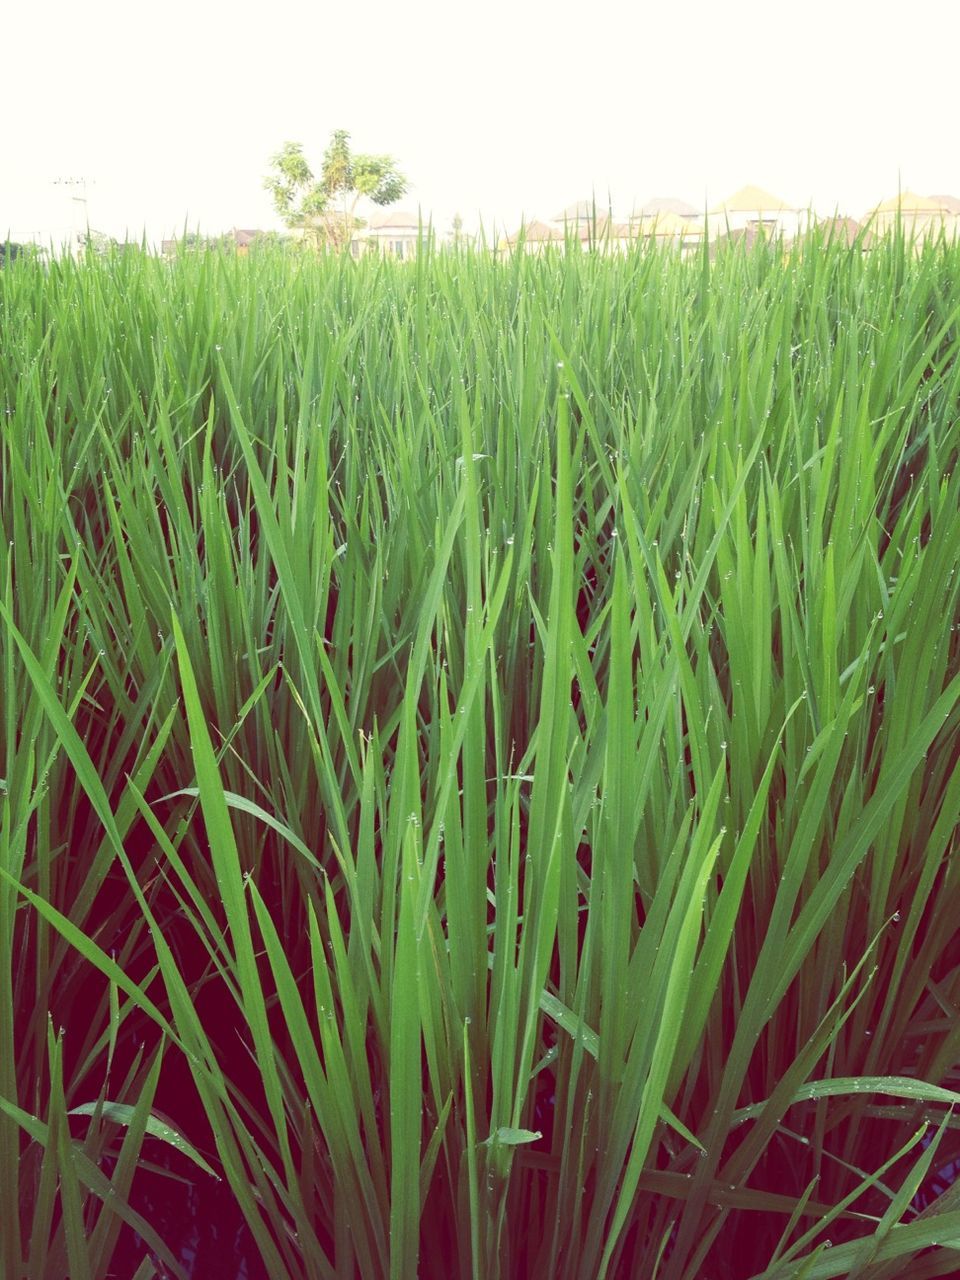 growth, field, agriculture, green color, crop, grass, rural scene, plant, farm, nature, beauty in nature, tranquility, cereal plant, freshness, cultivated land, growing, tranquil scene, clear sky, landscape, close-up